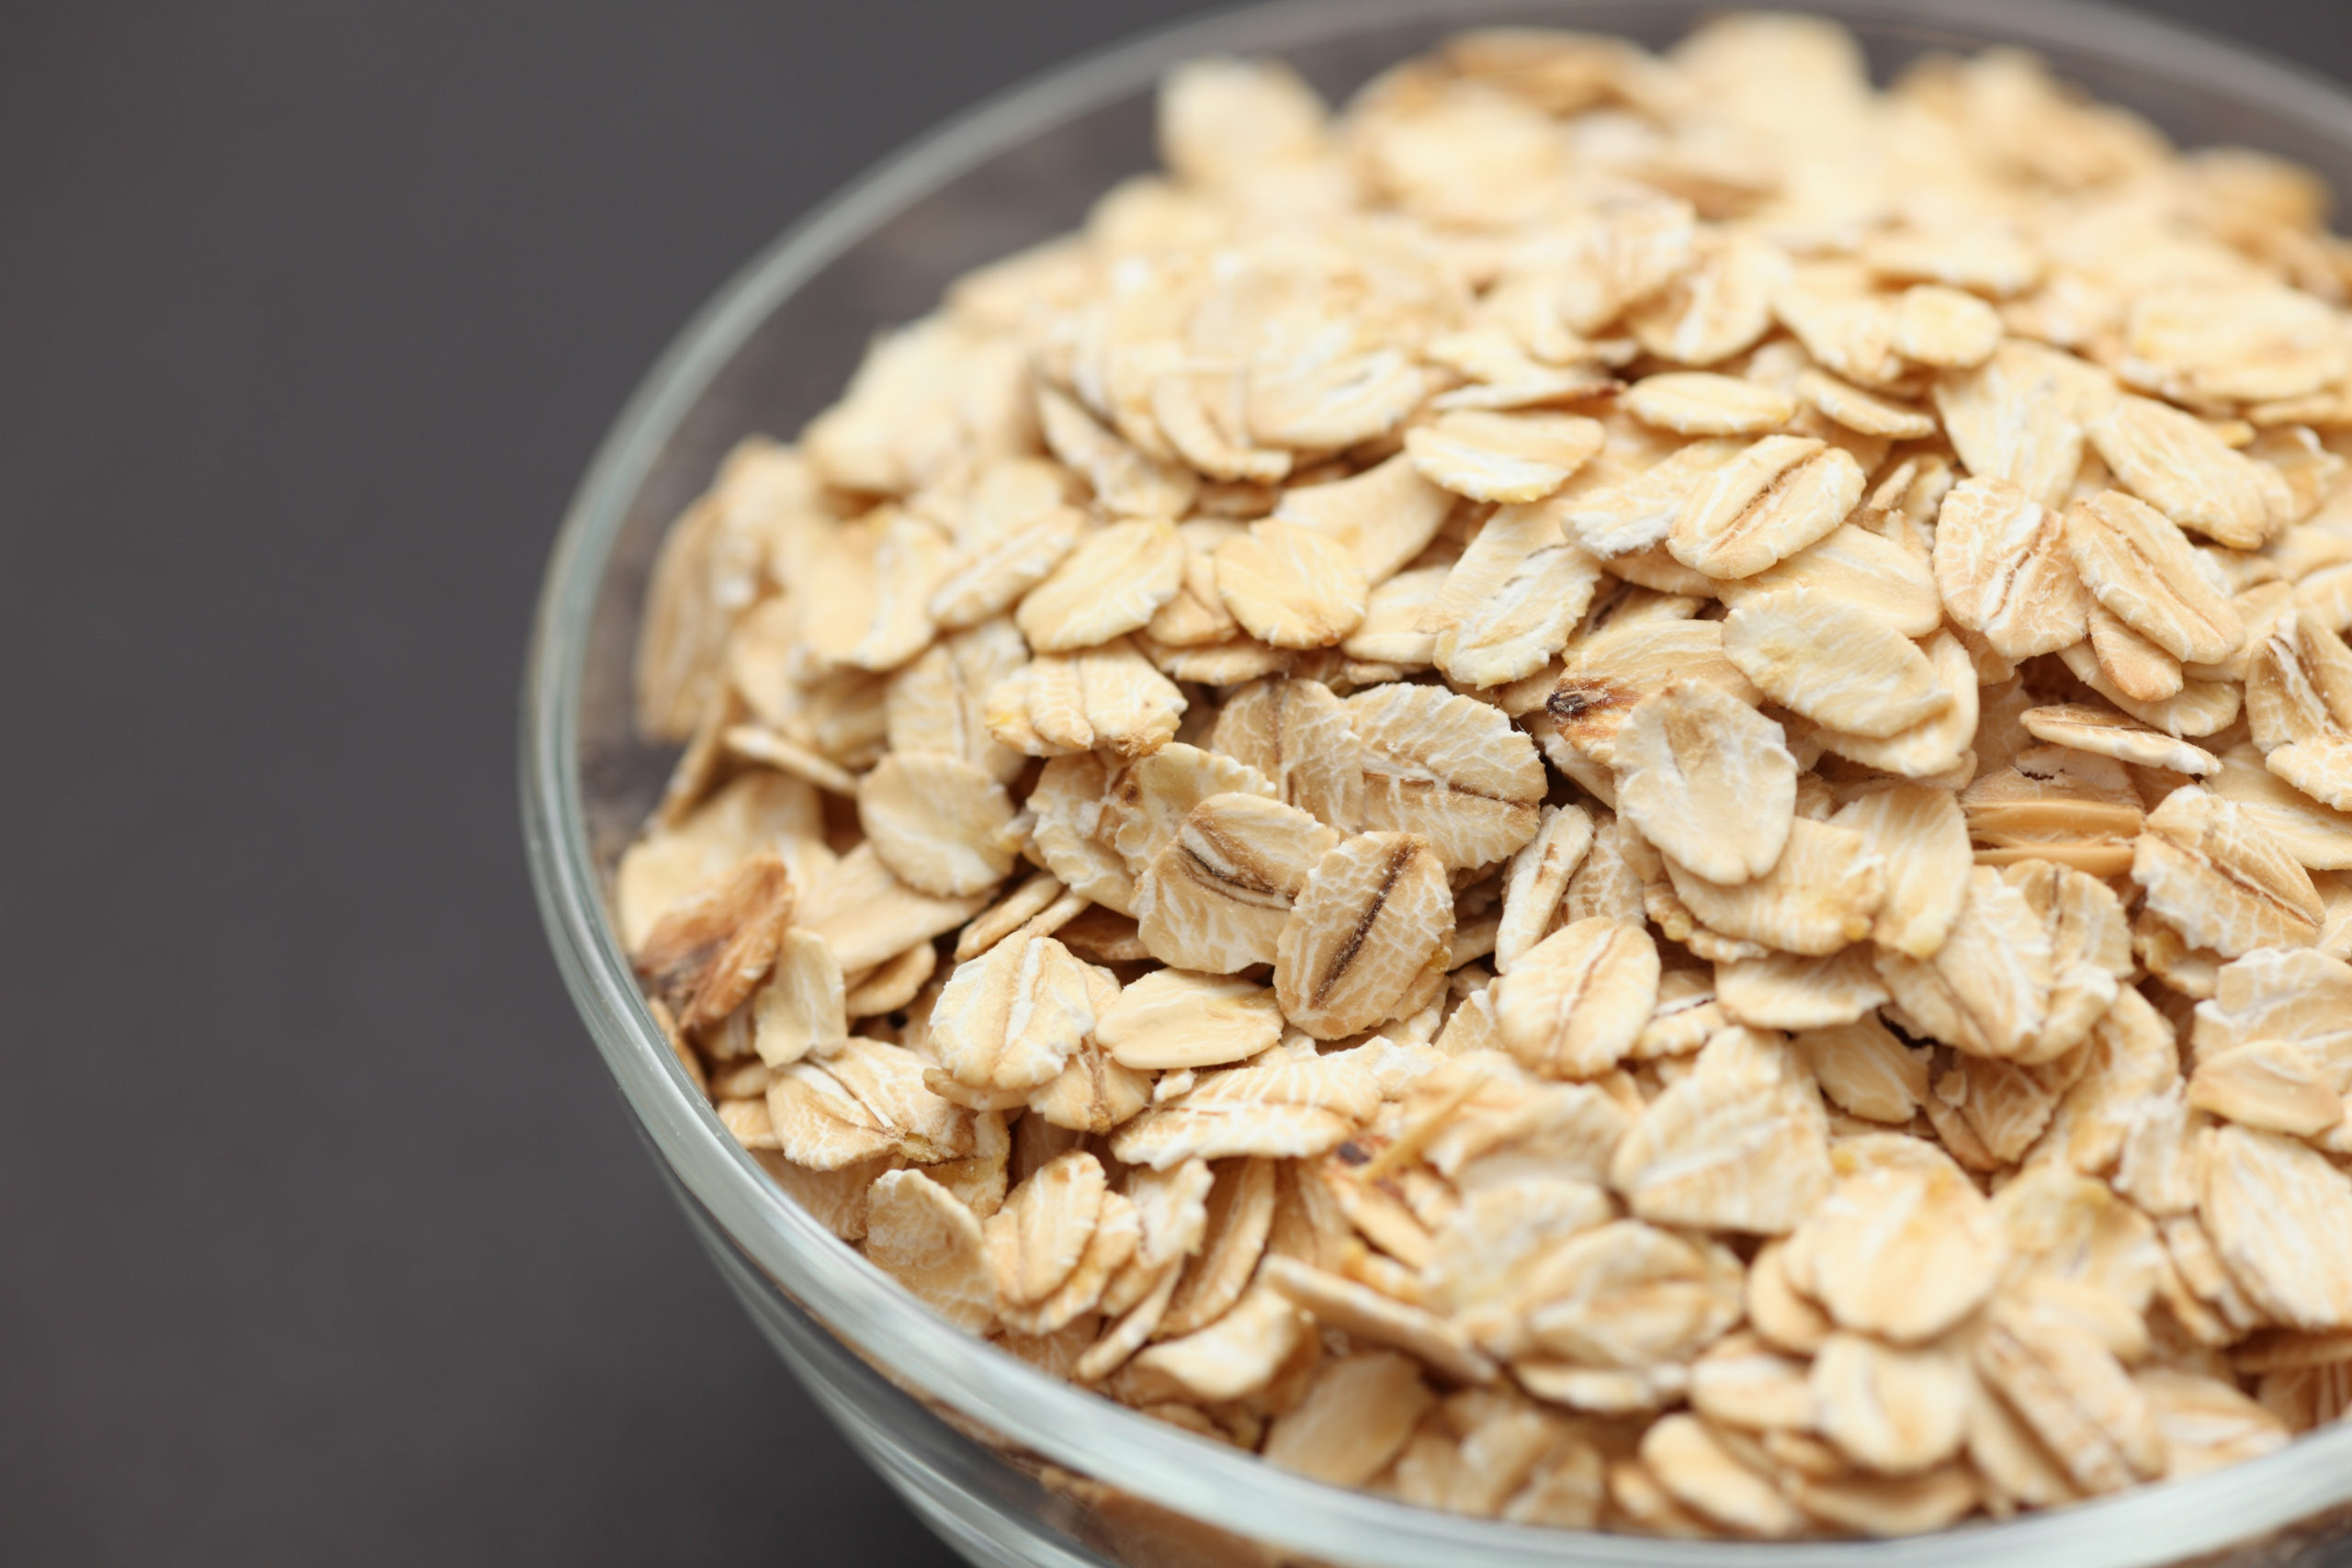 Eating Oats Can Be Fun. These Are a Few Ways of Experimenting With It